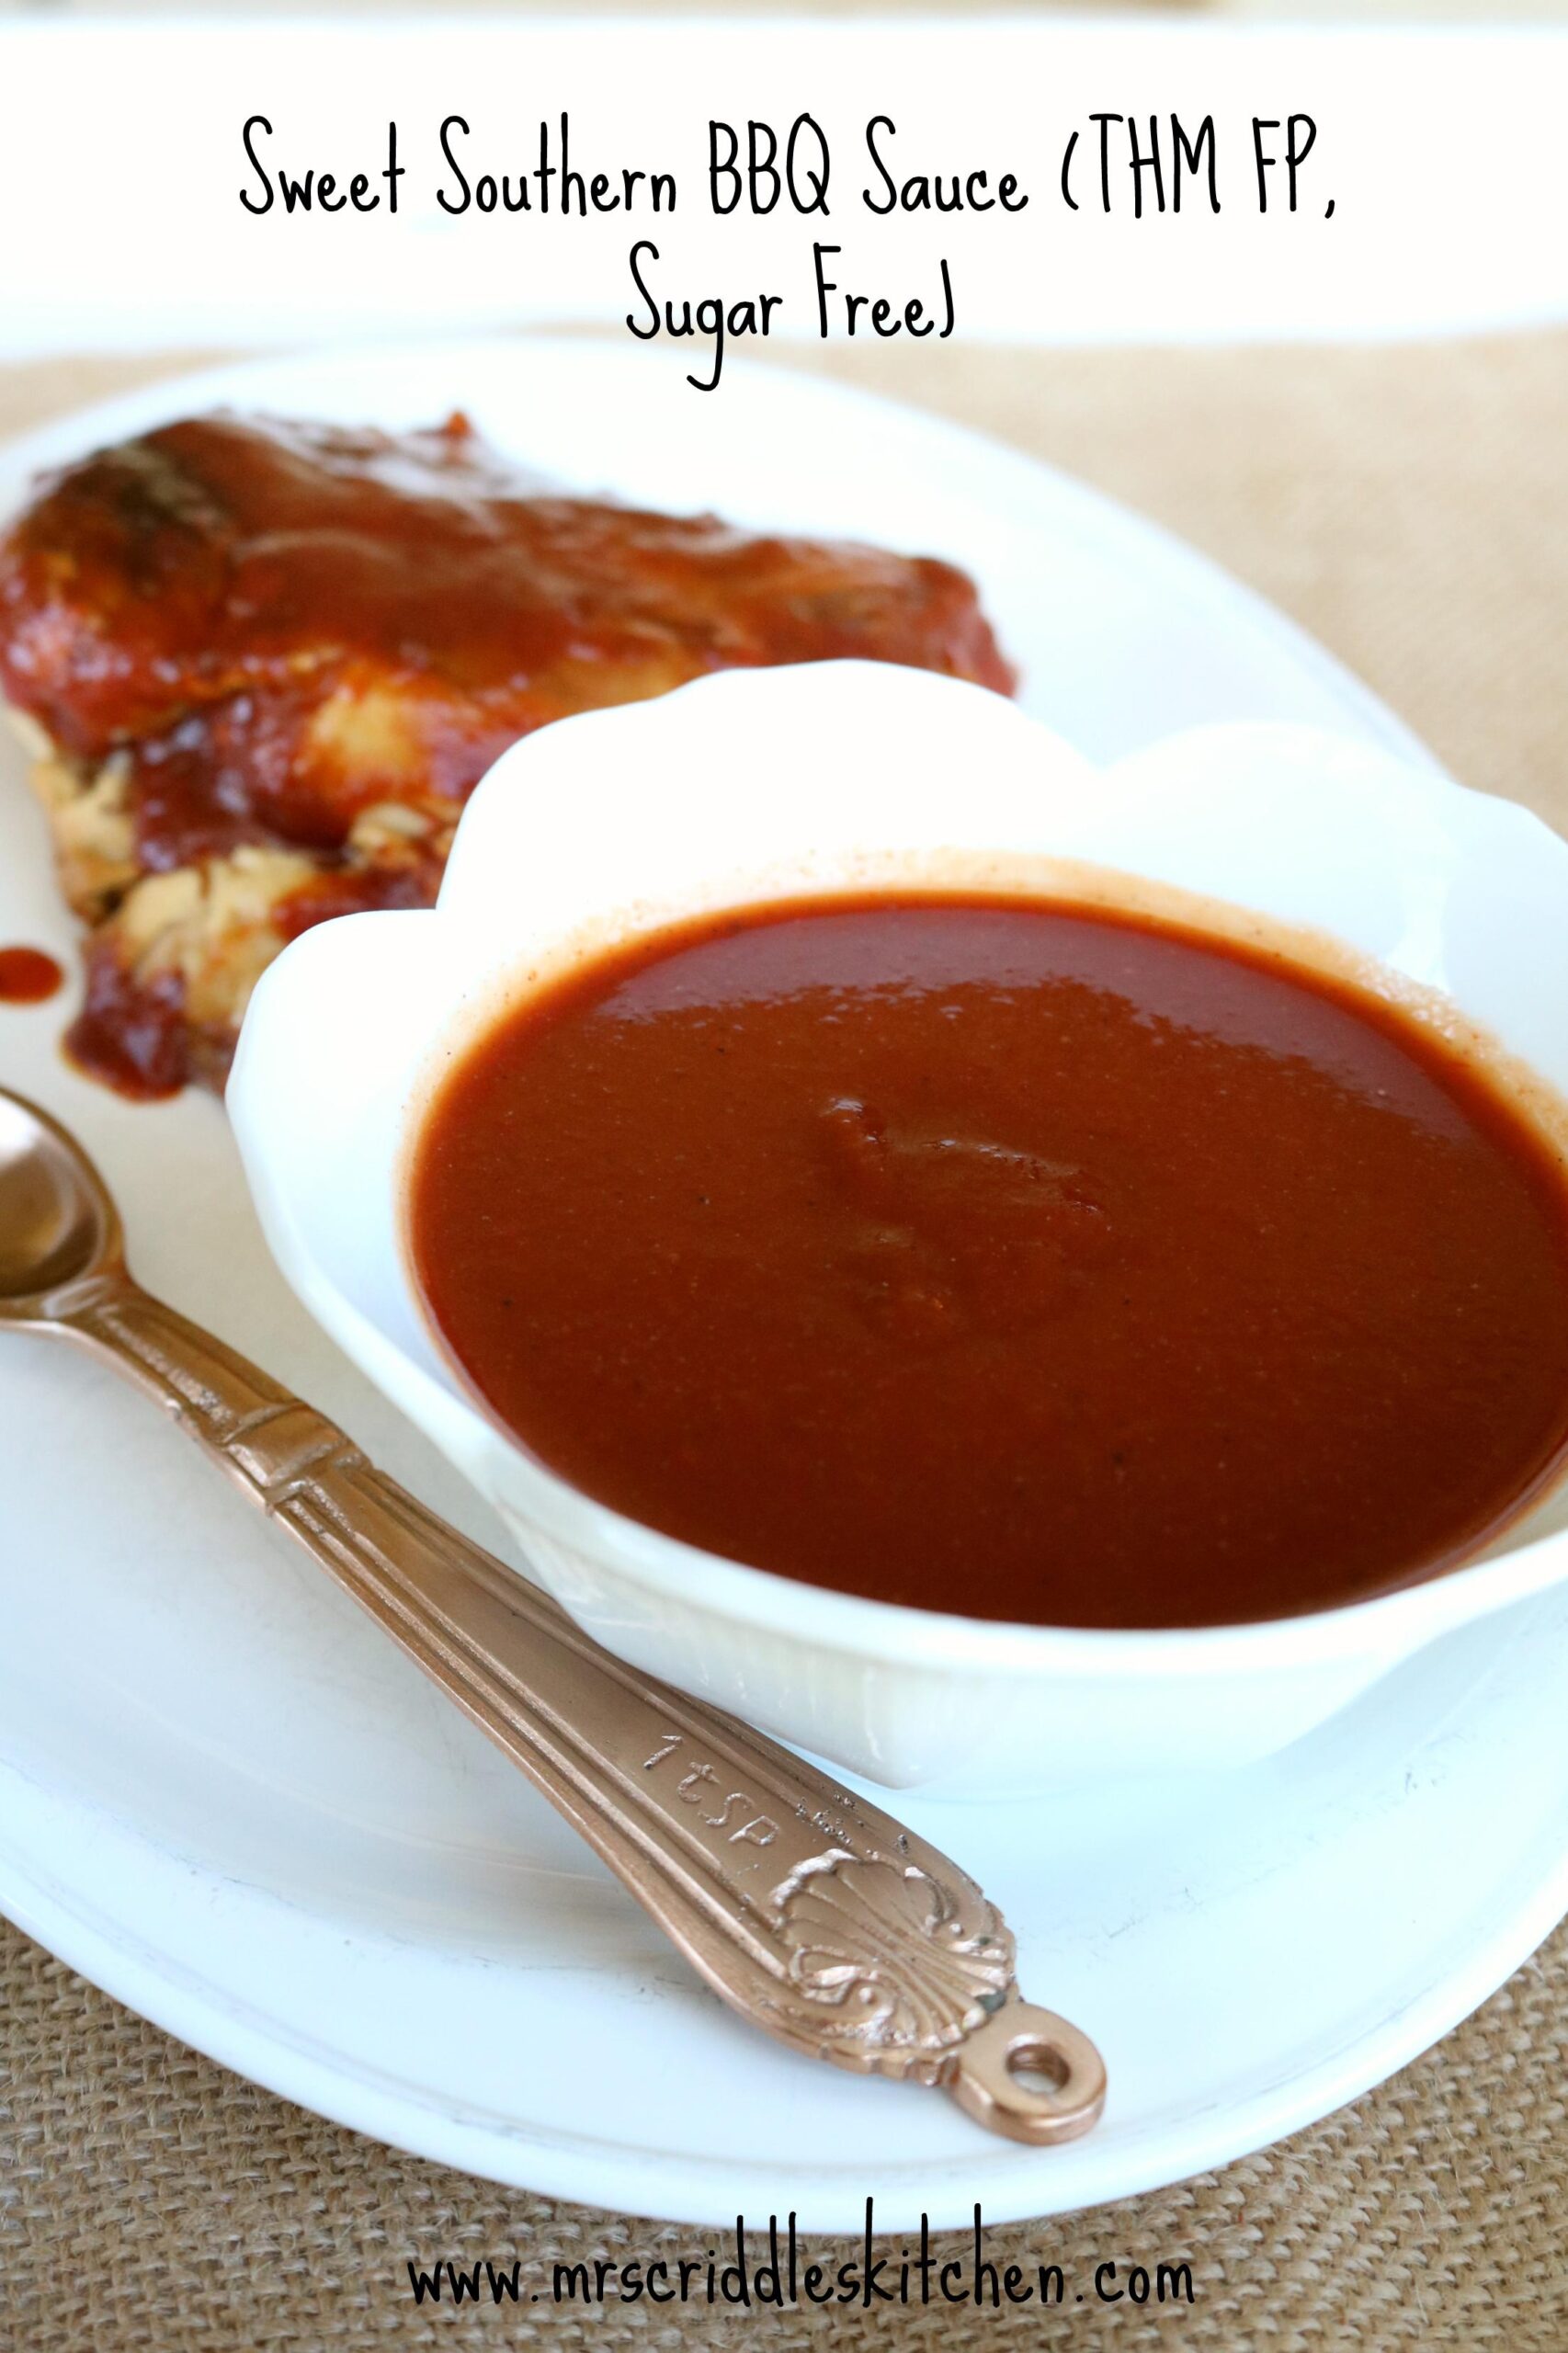  This sauce will take your BBQ recipes to the next level.